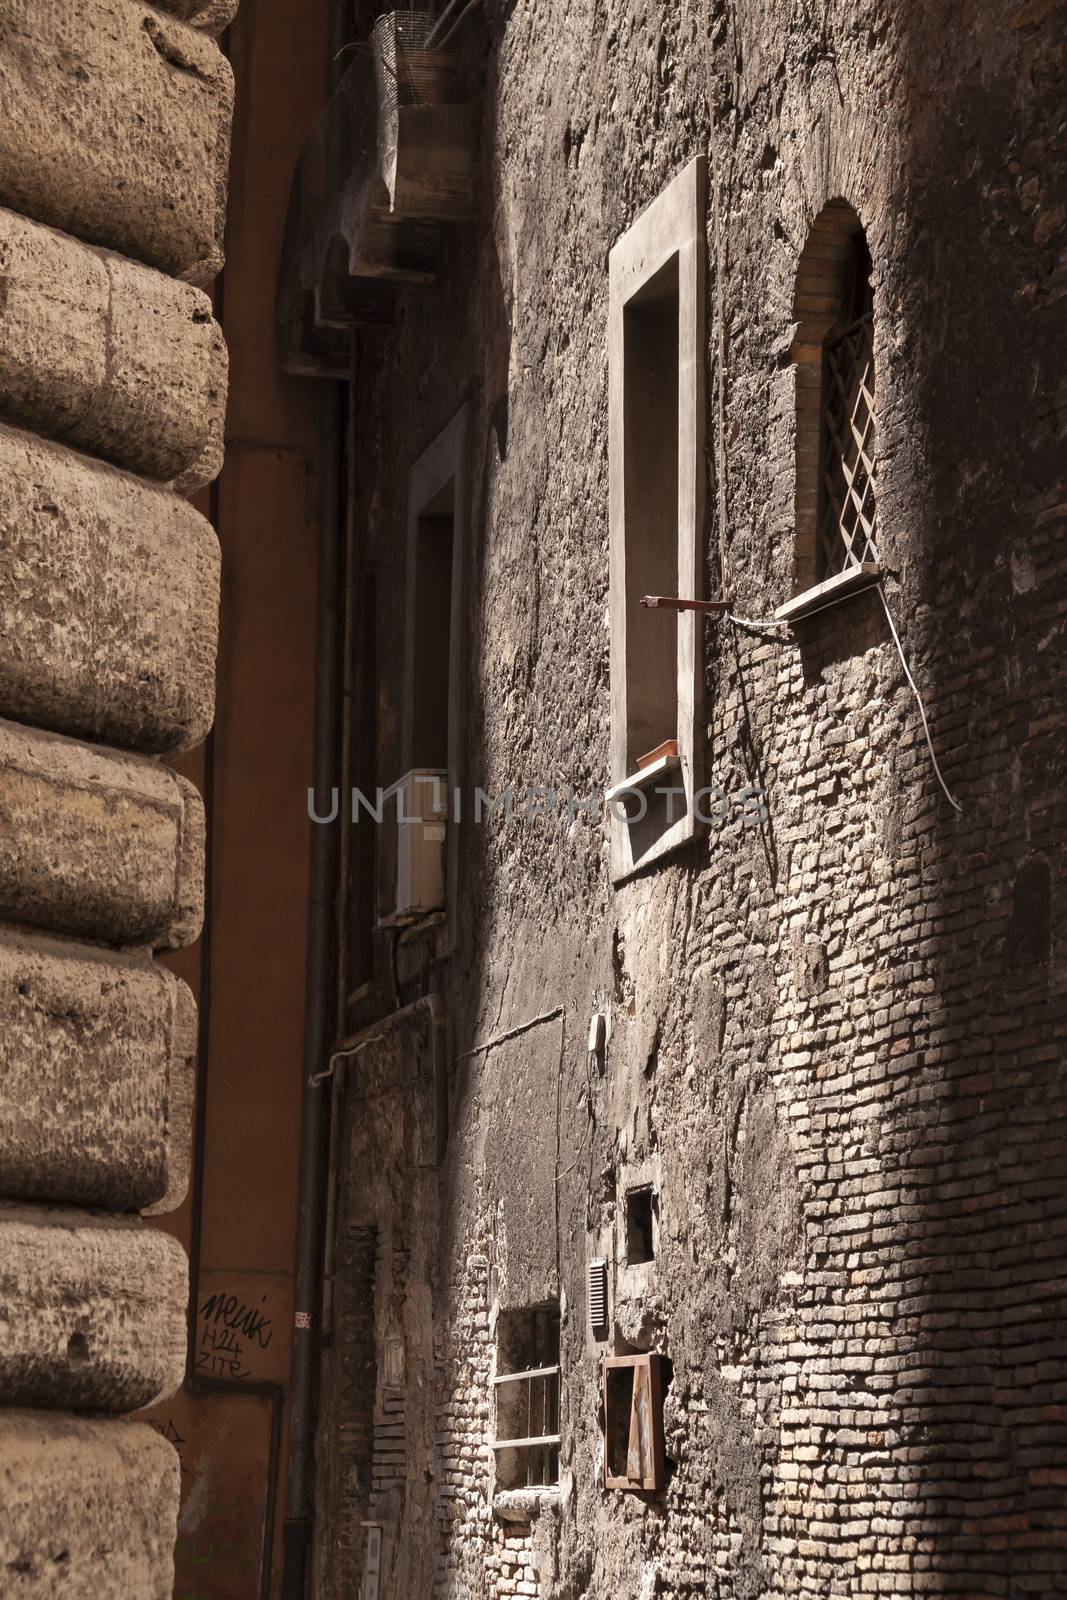 Rome, Italy - June 28, 2010: Old houses and walls in an alleyway between two streets in the center of Rome.